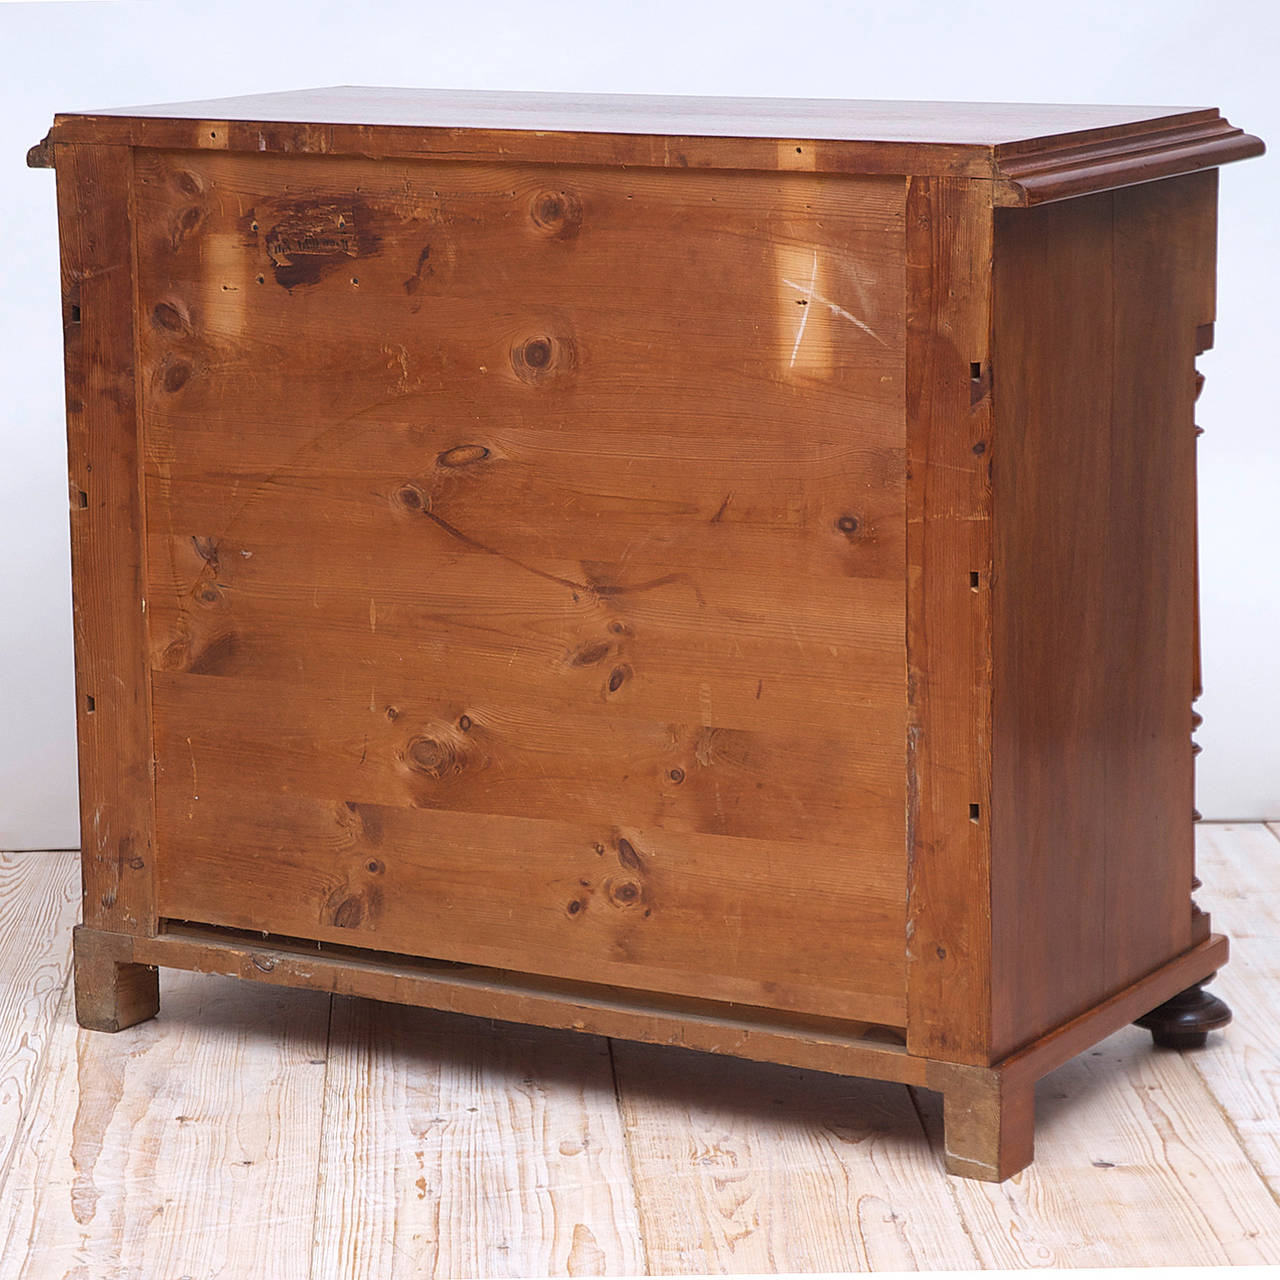 Polished 19th Century Chest of Drawers in Figured Walnut